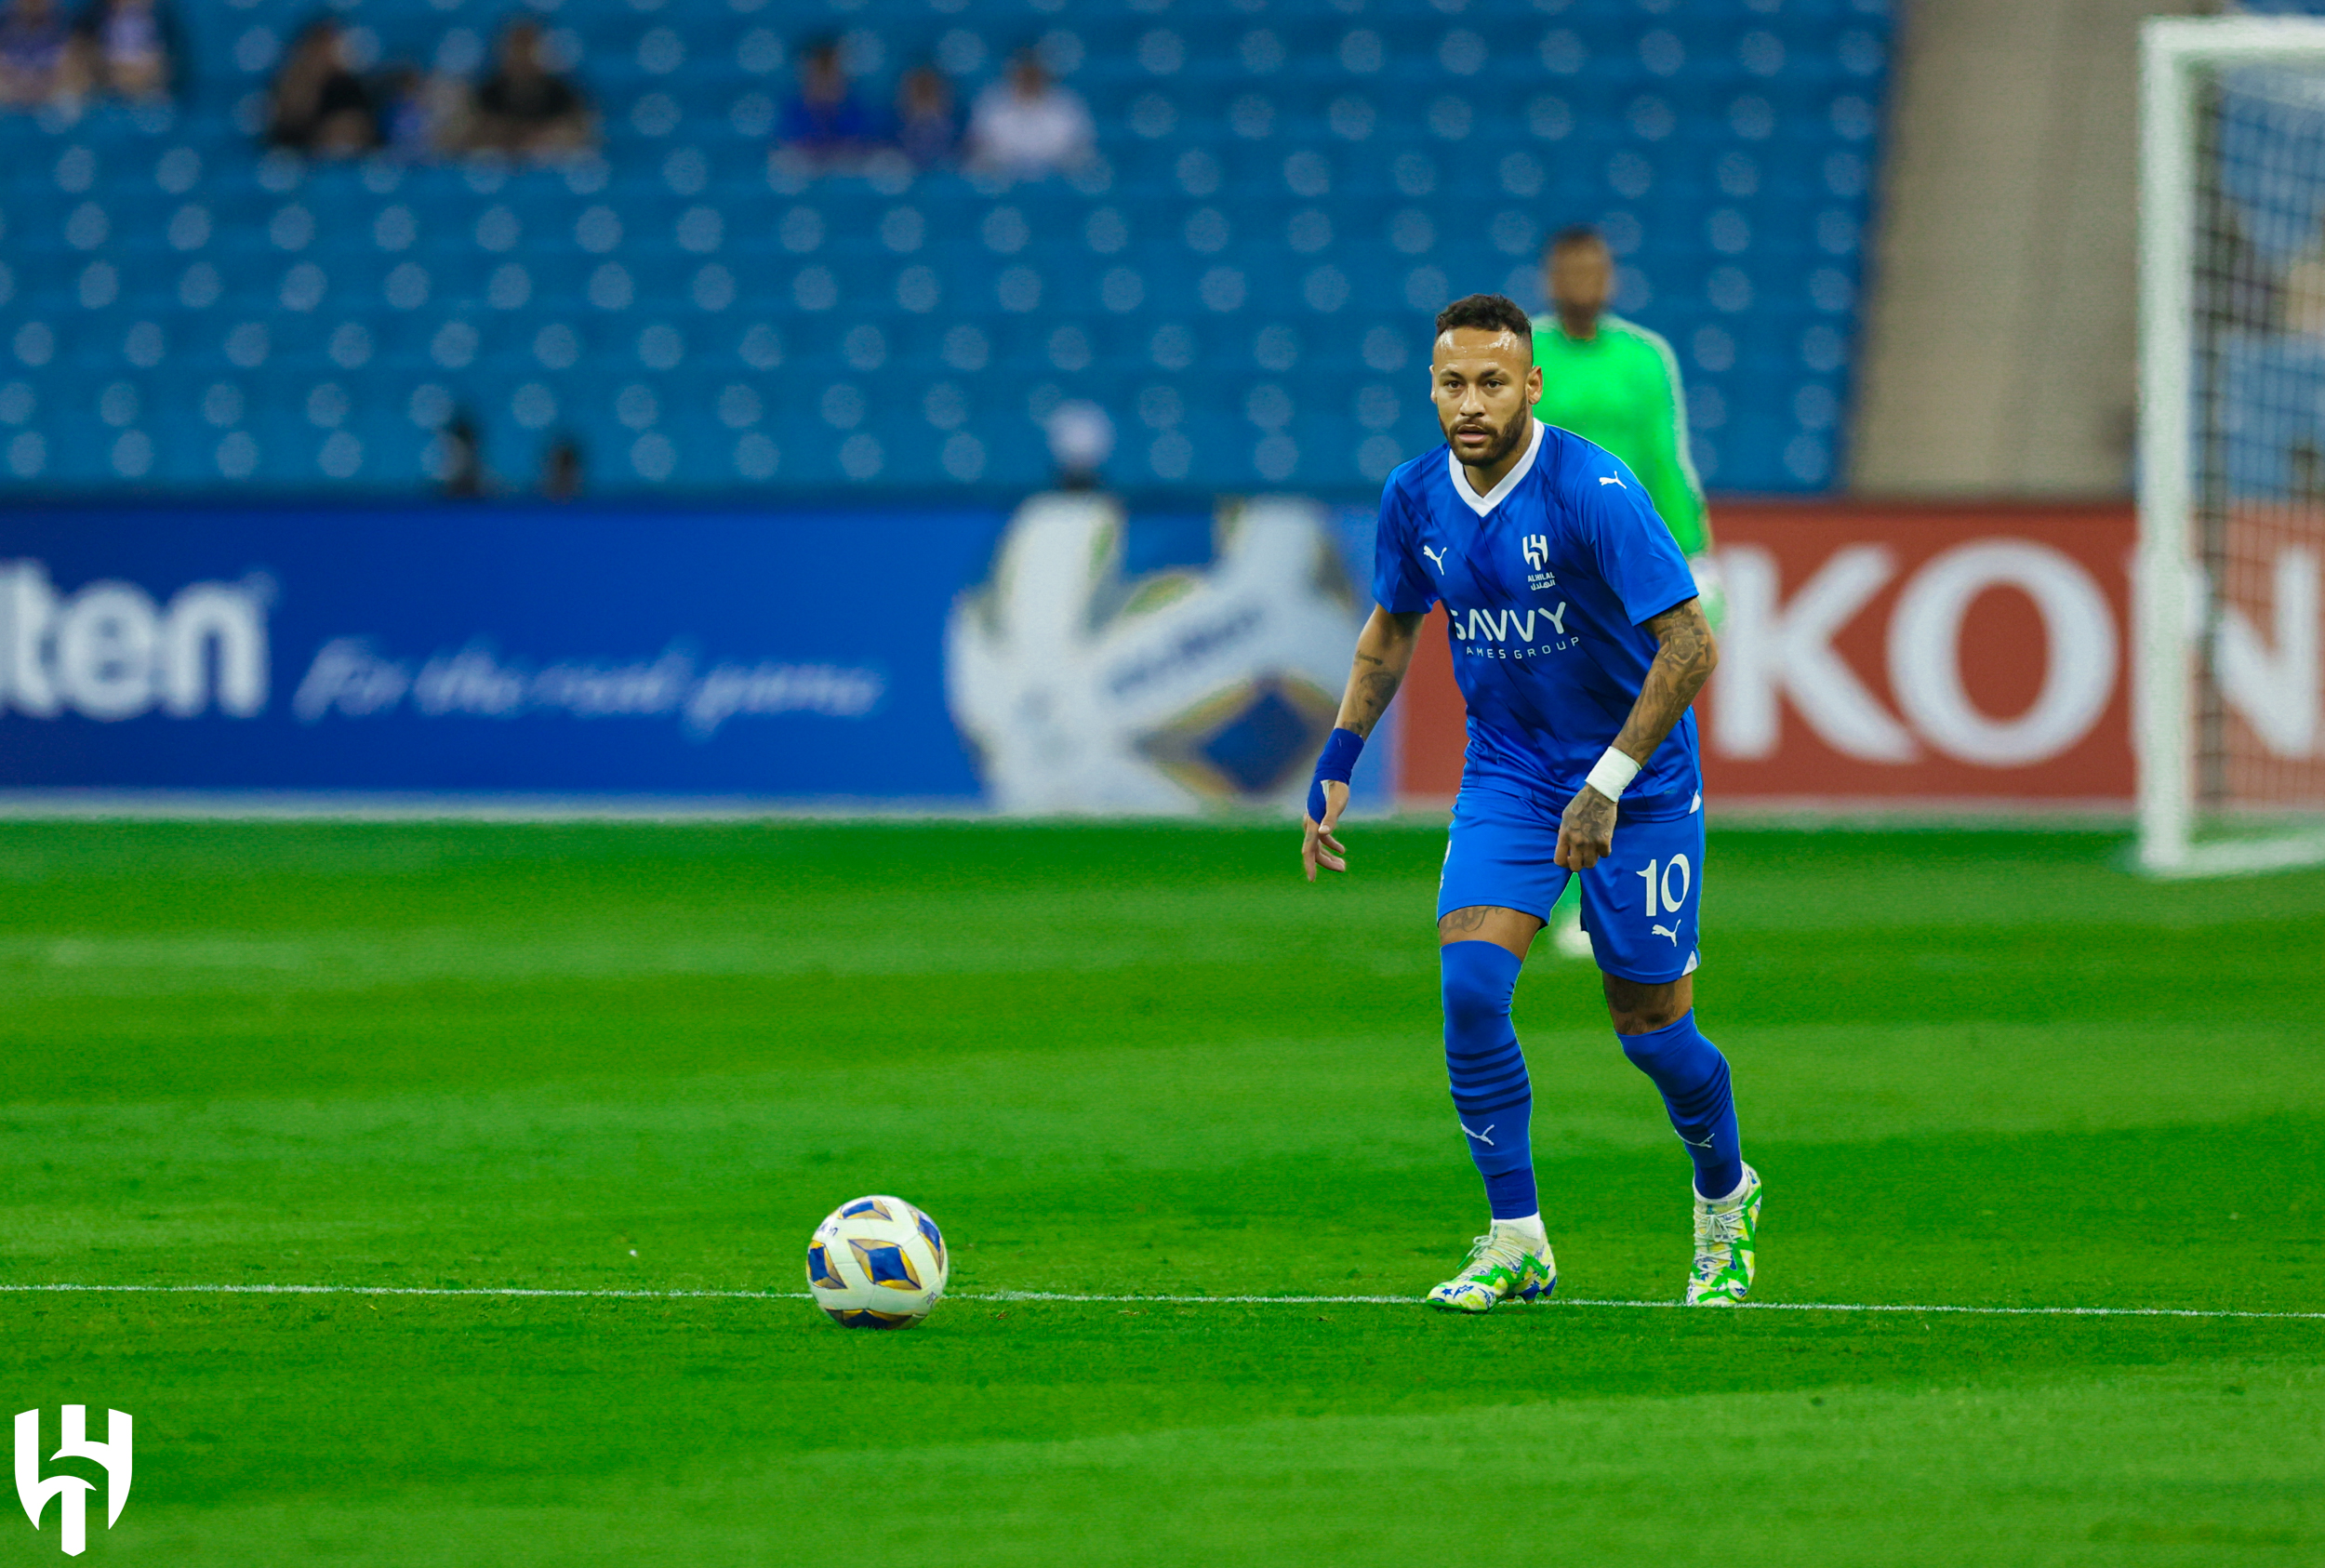 On a thrilling match, Al-Hilal ties the match at their first AFC